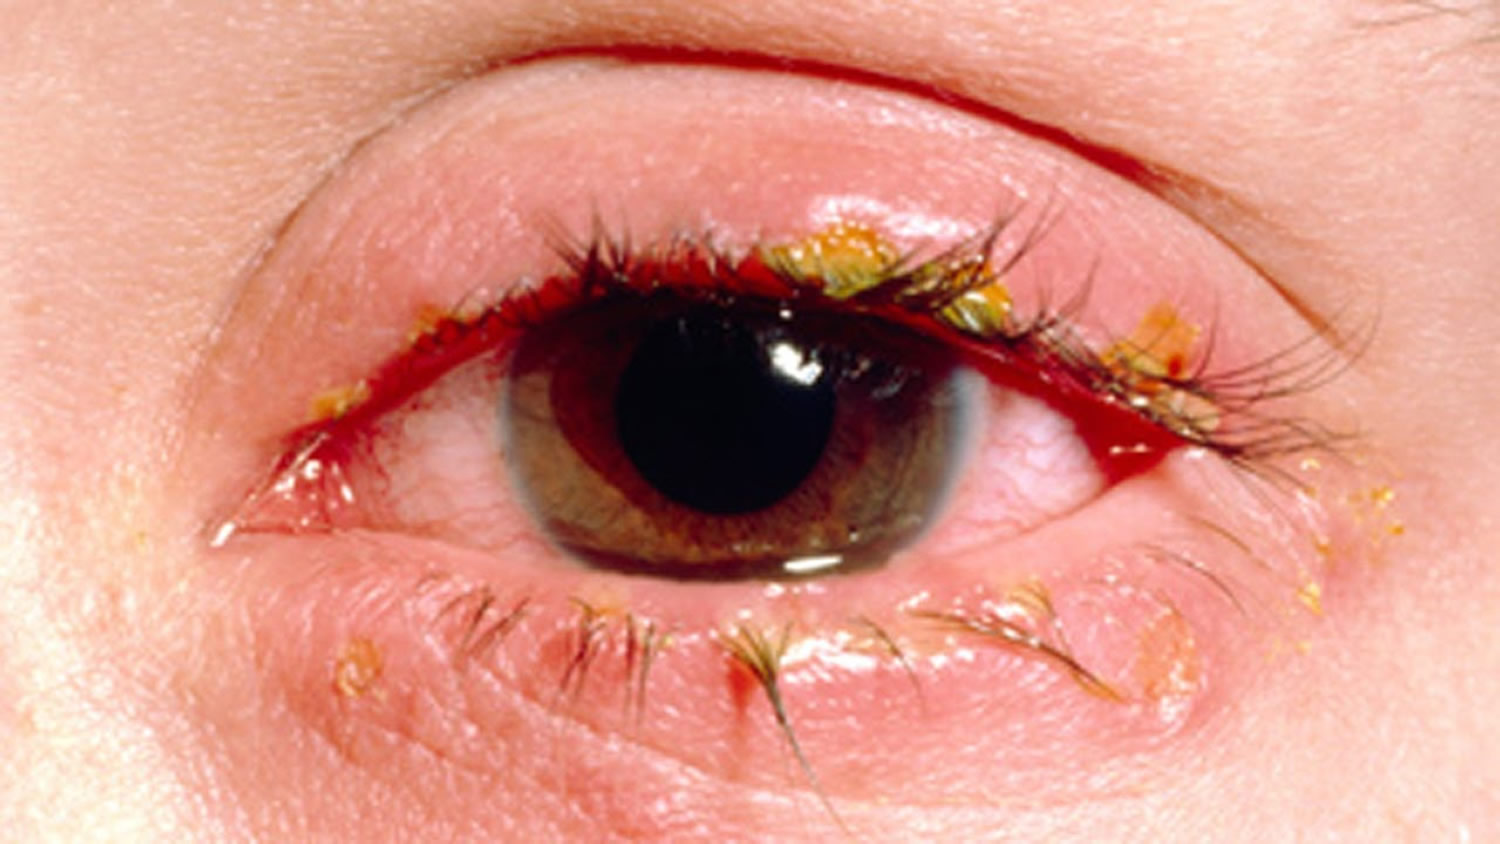 Pimple On Eyelid Types, Causes & How To Treat Them